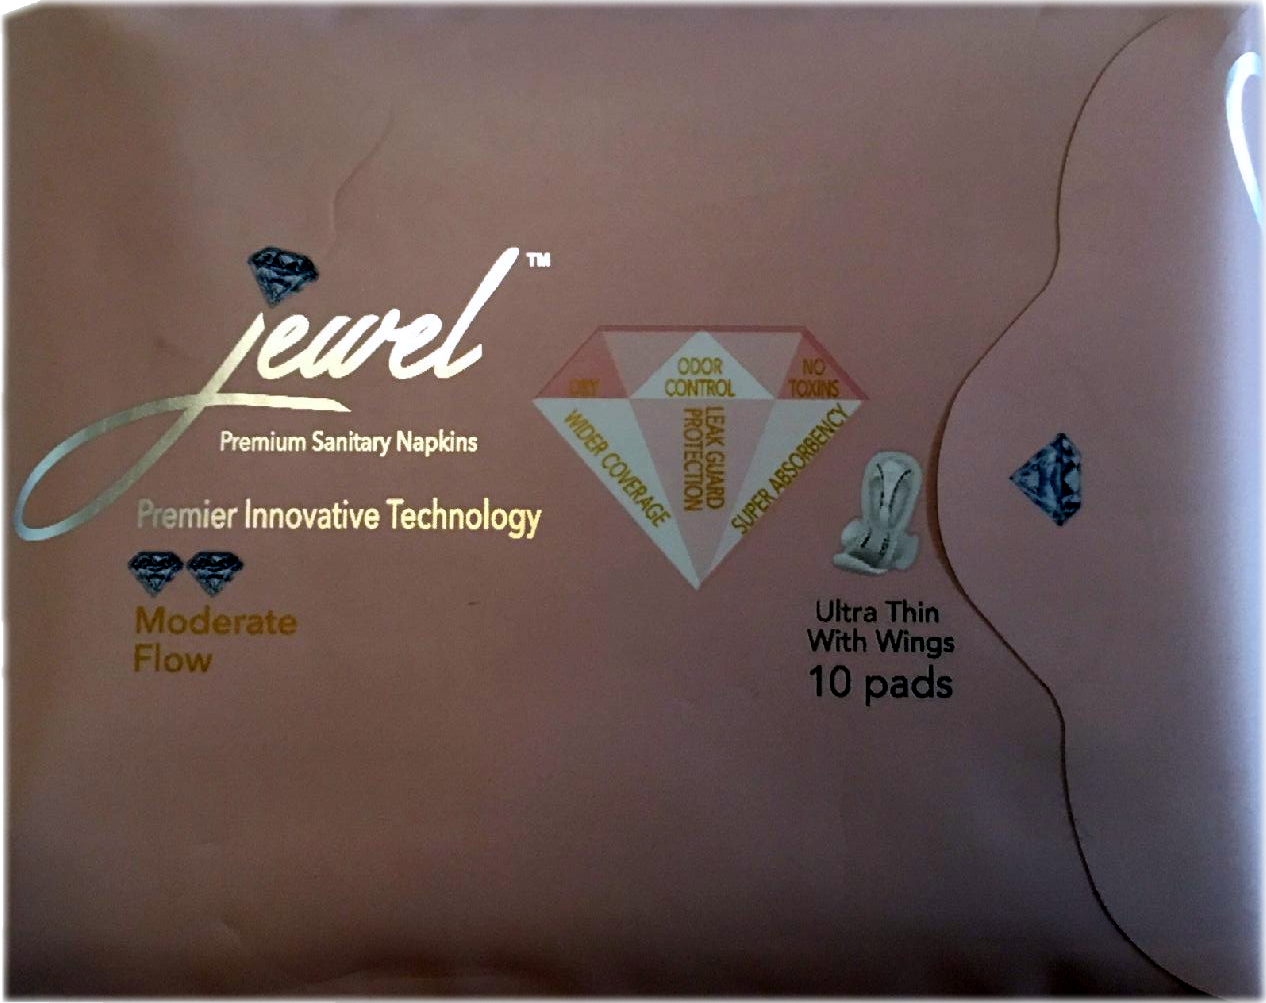 Jewel Sanitary Napkin - Ultra Thin with Wings - Moderate Flow | 10ct / $6.00